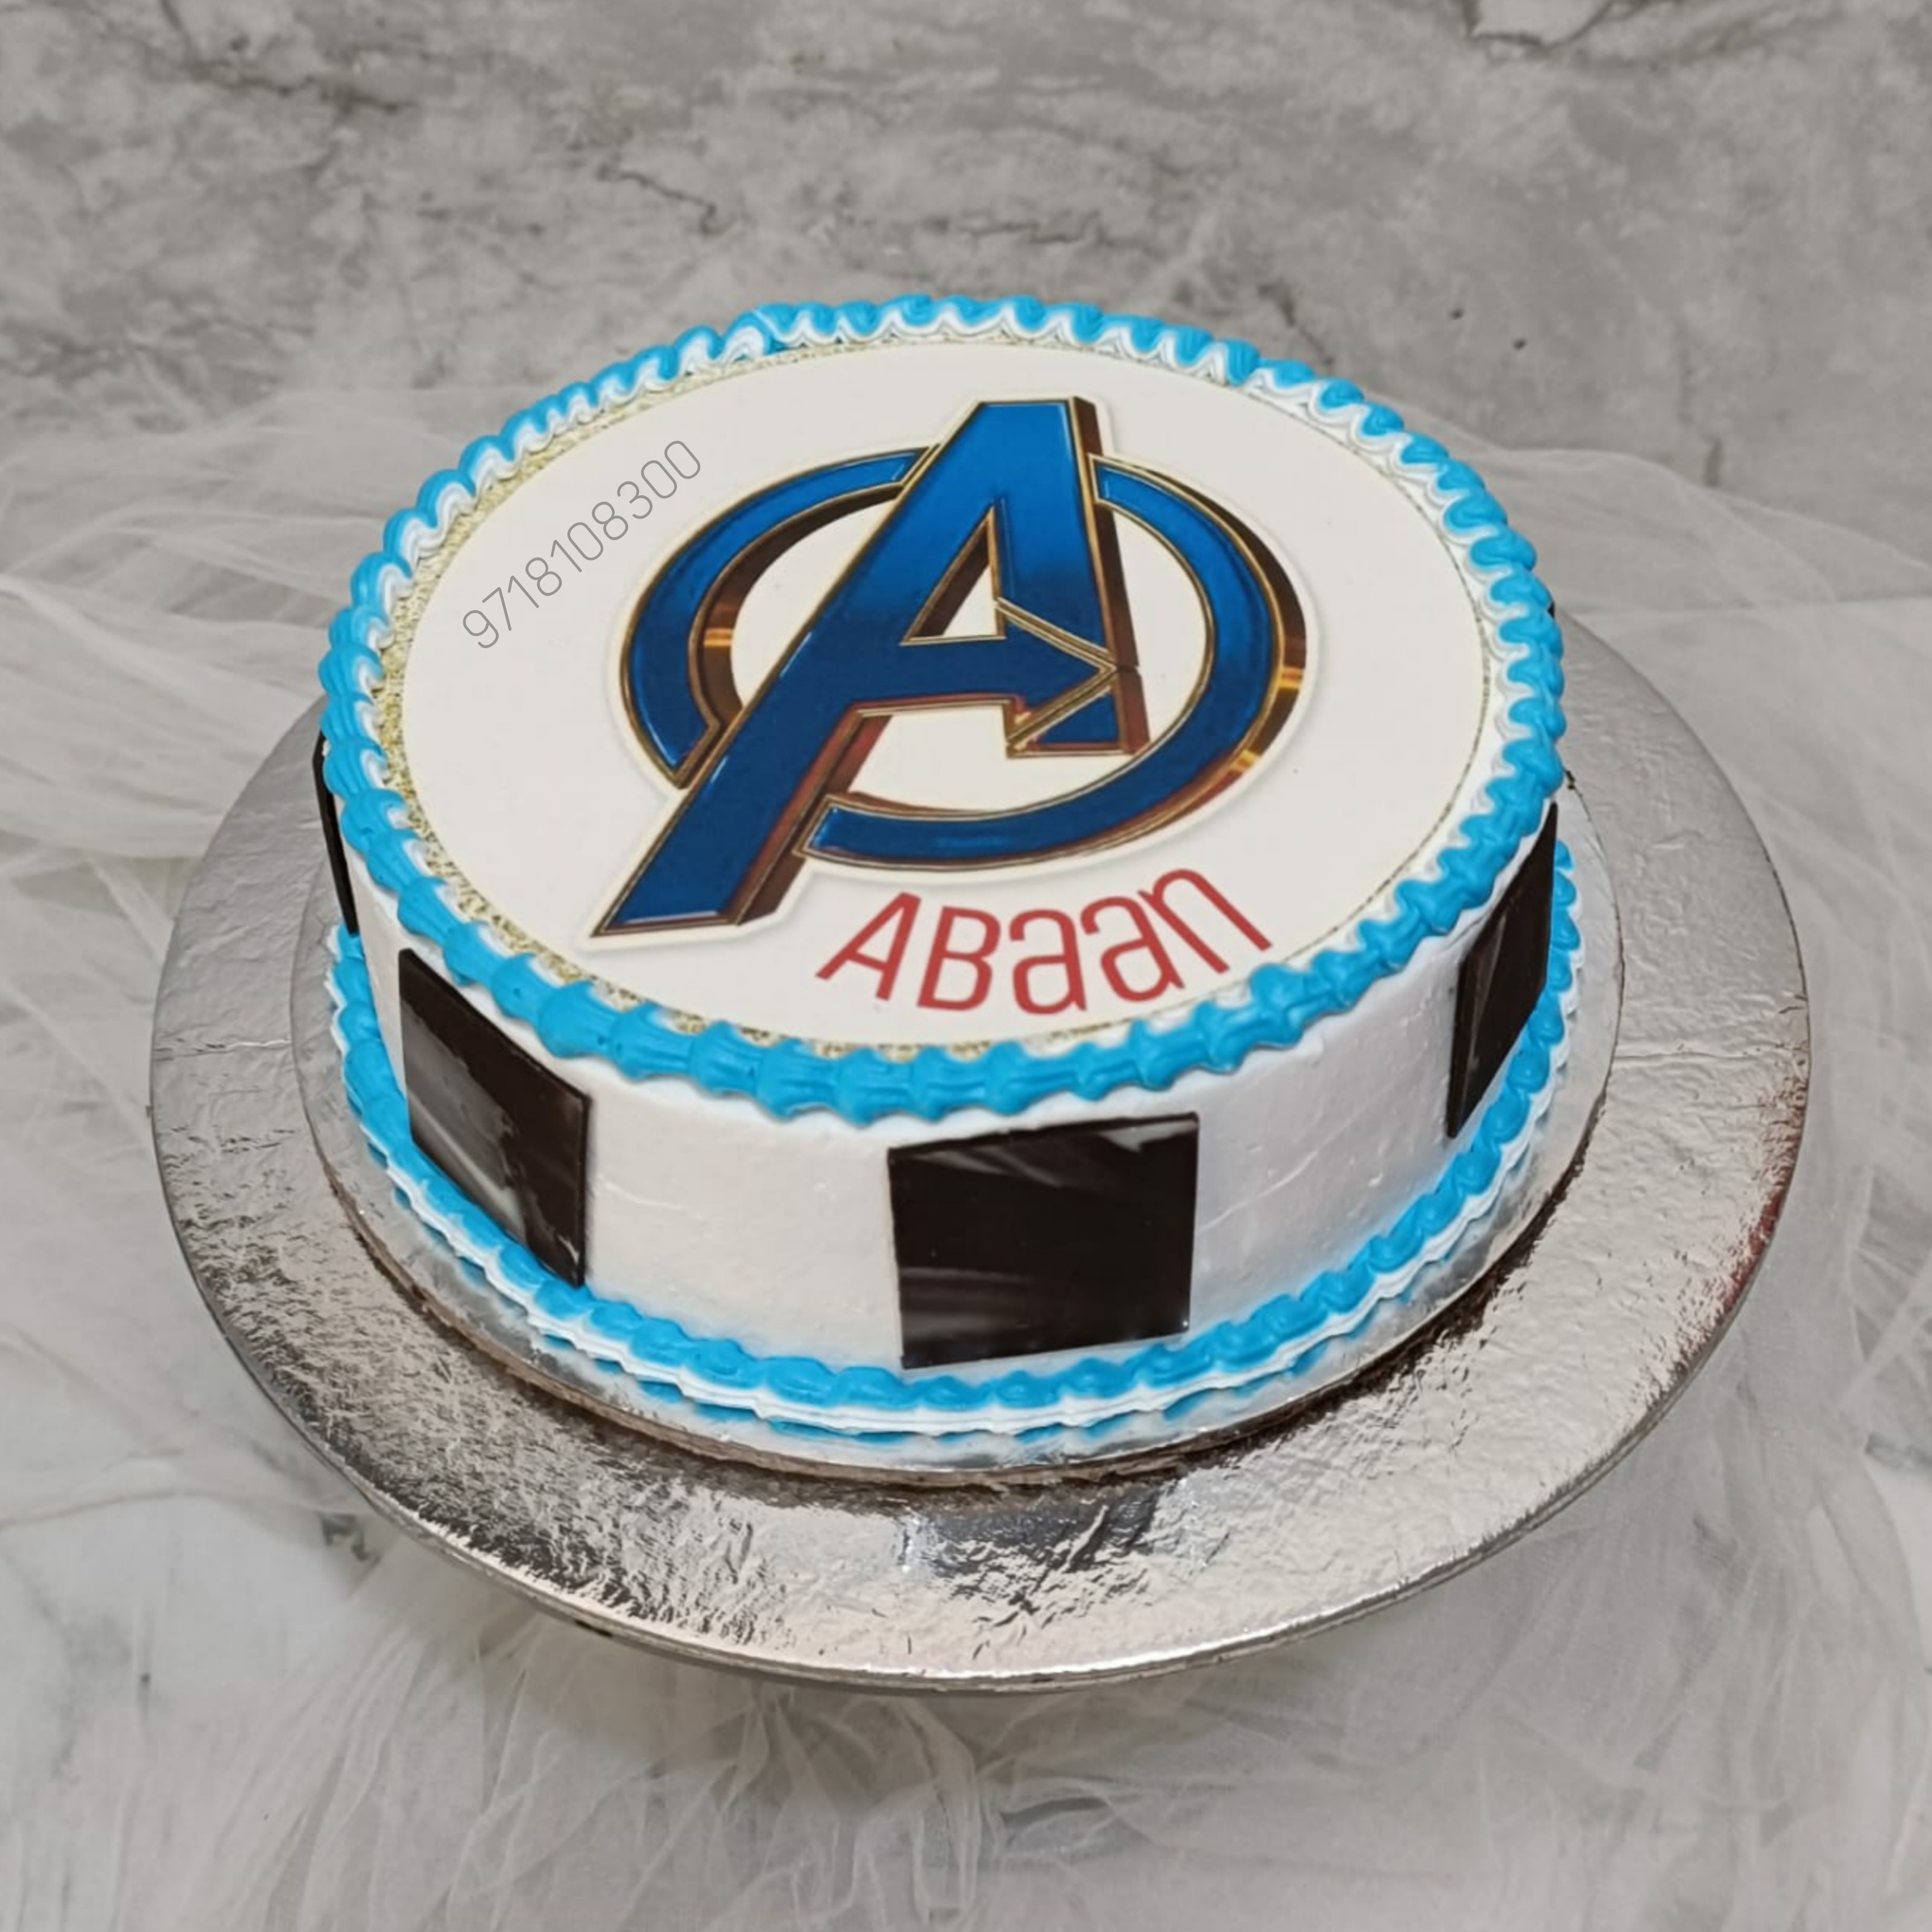 Avenger's Cake ~ Full Scoops - A food blog with easy,simple & tasty recipes!